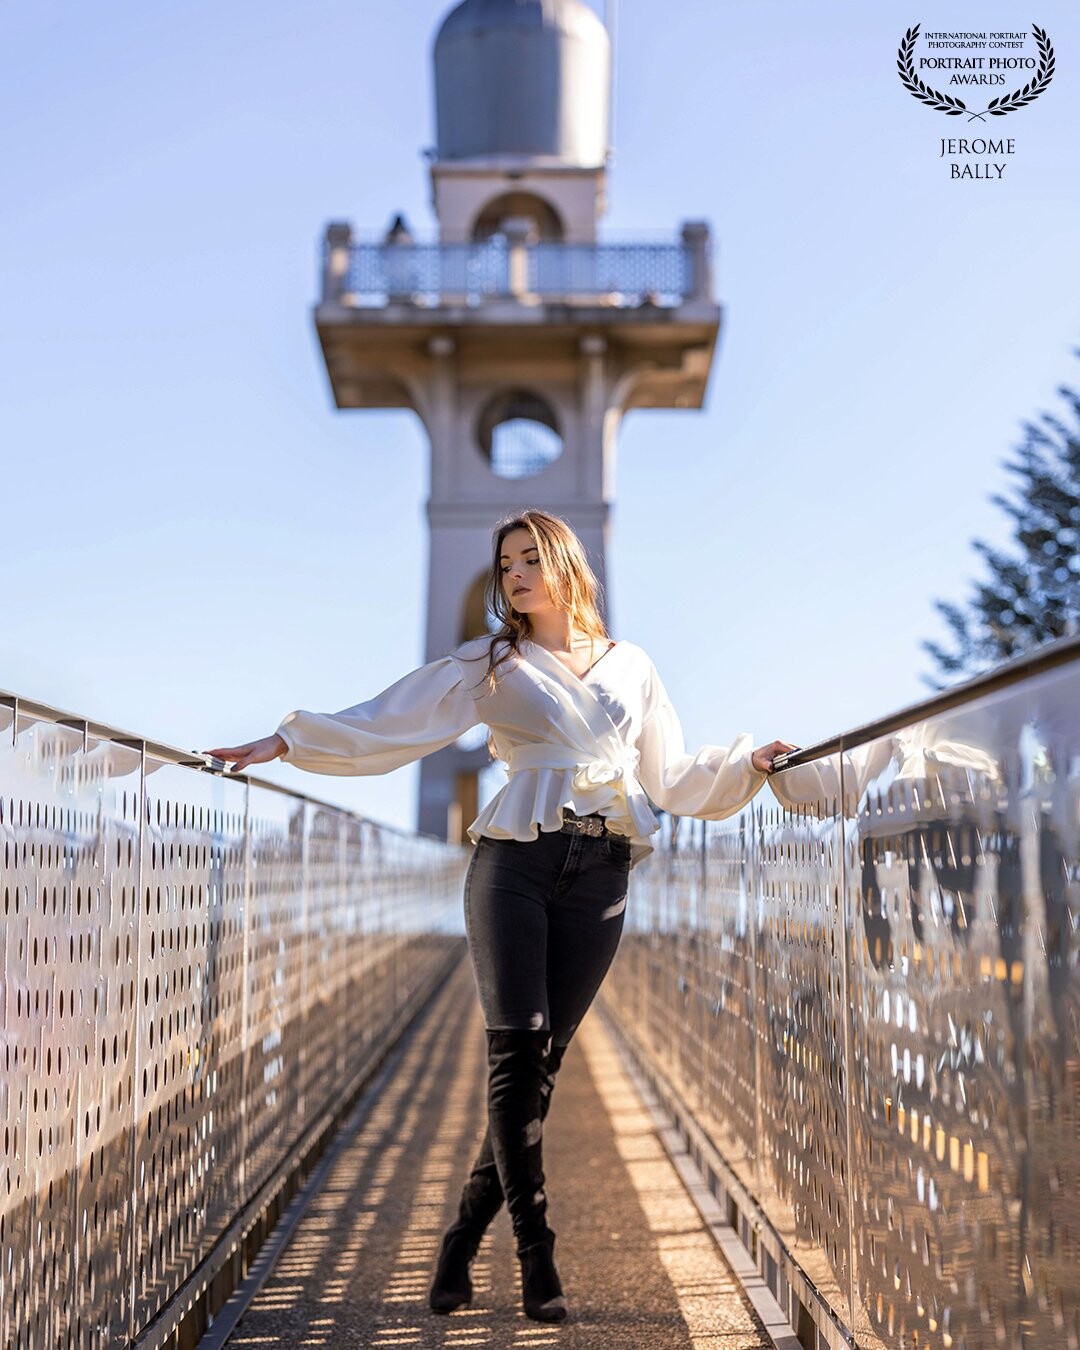 We visited a viewpoint oder the lake of Neuchatel and we were attracted to this leading  lines. I had the chance to take this picture with the beautiful @katherine.vollen.